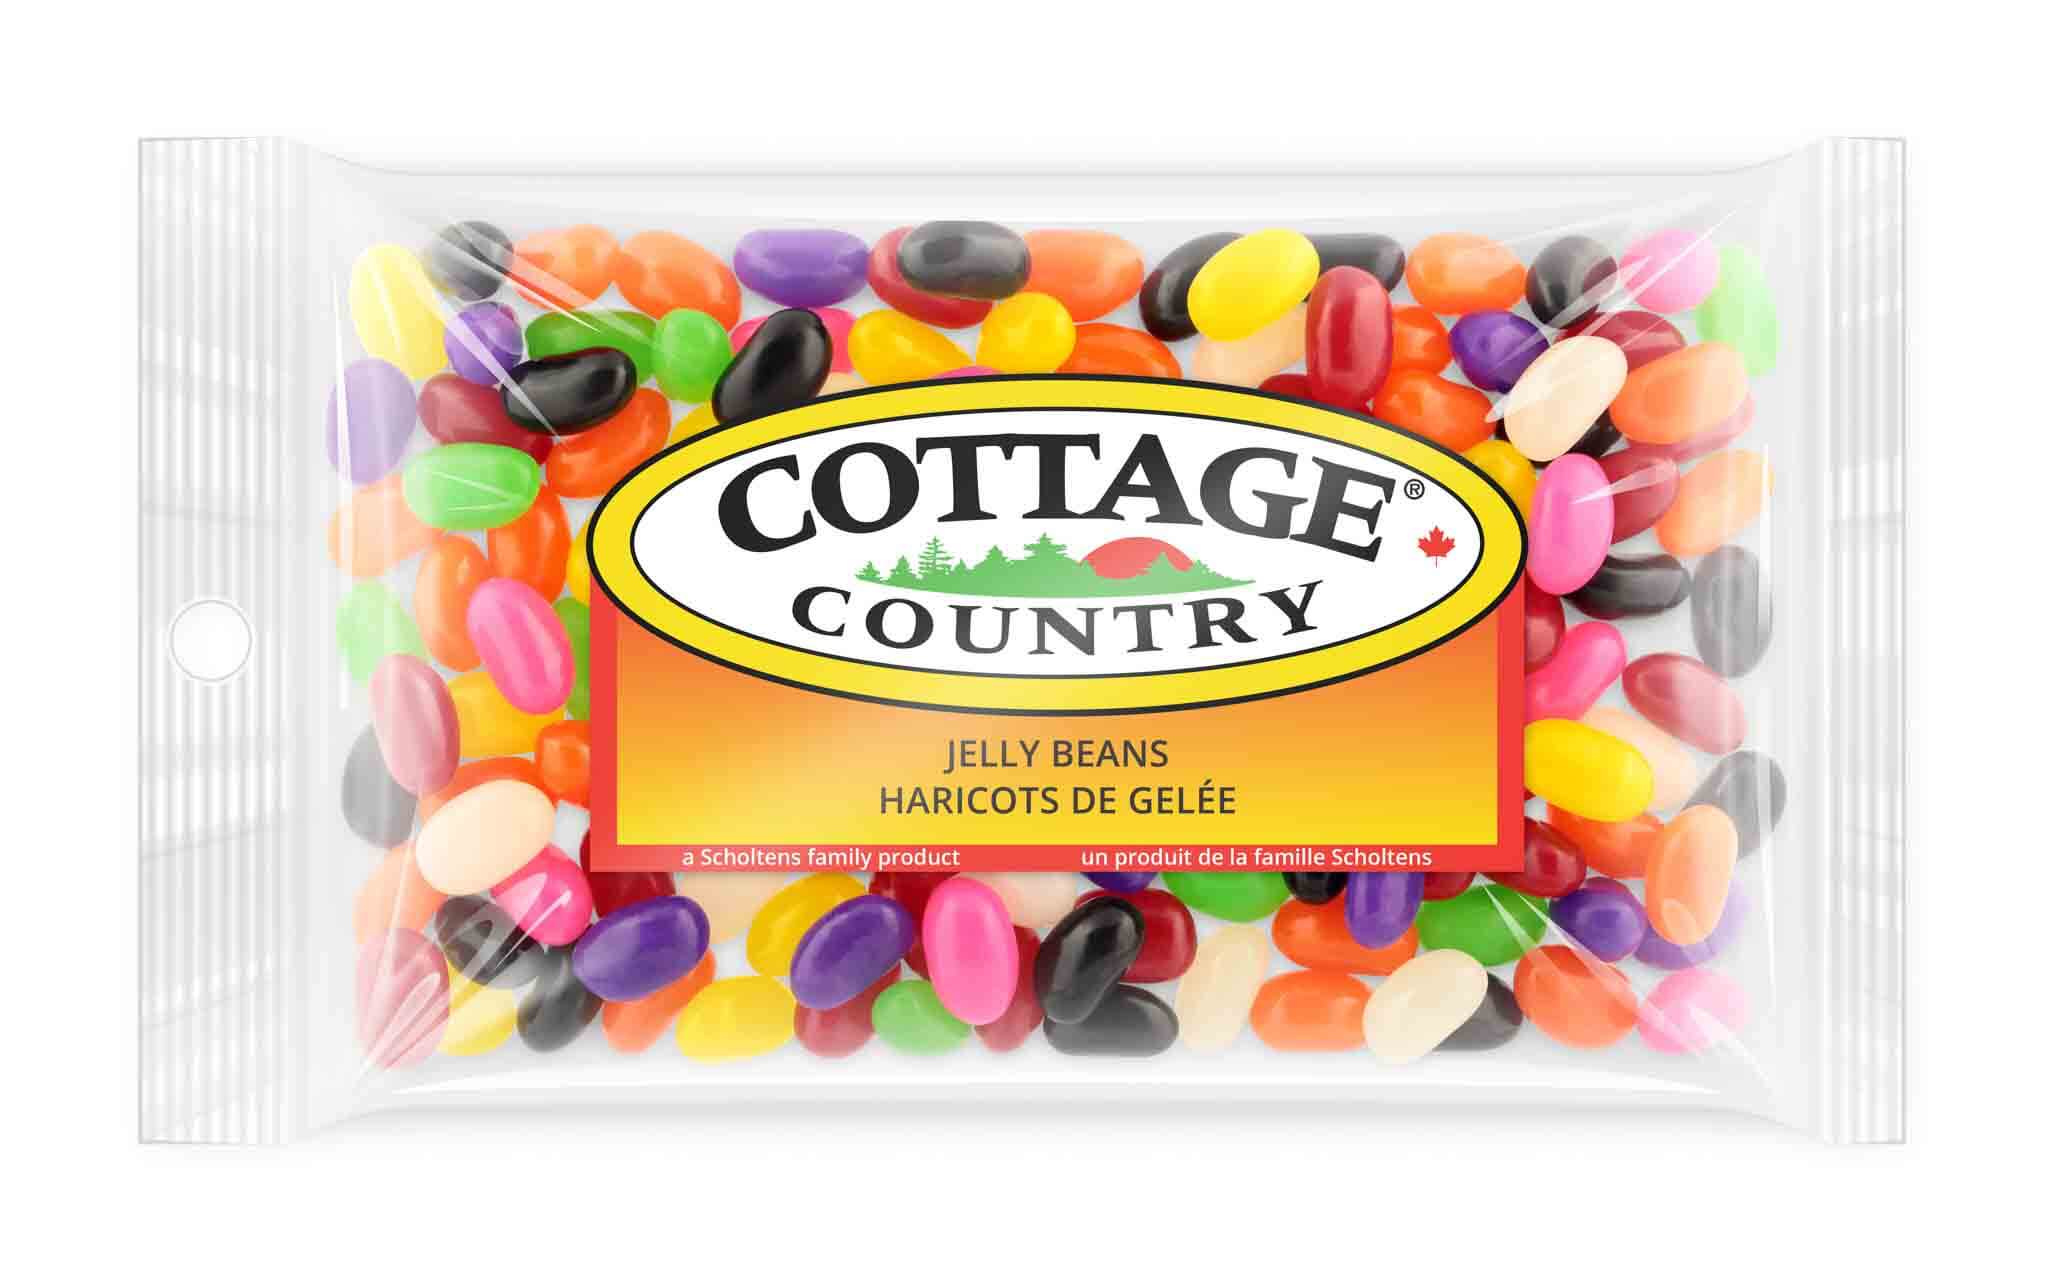 315g　Candies　Jelly　Country　Beans　Cottage